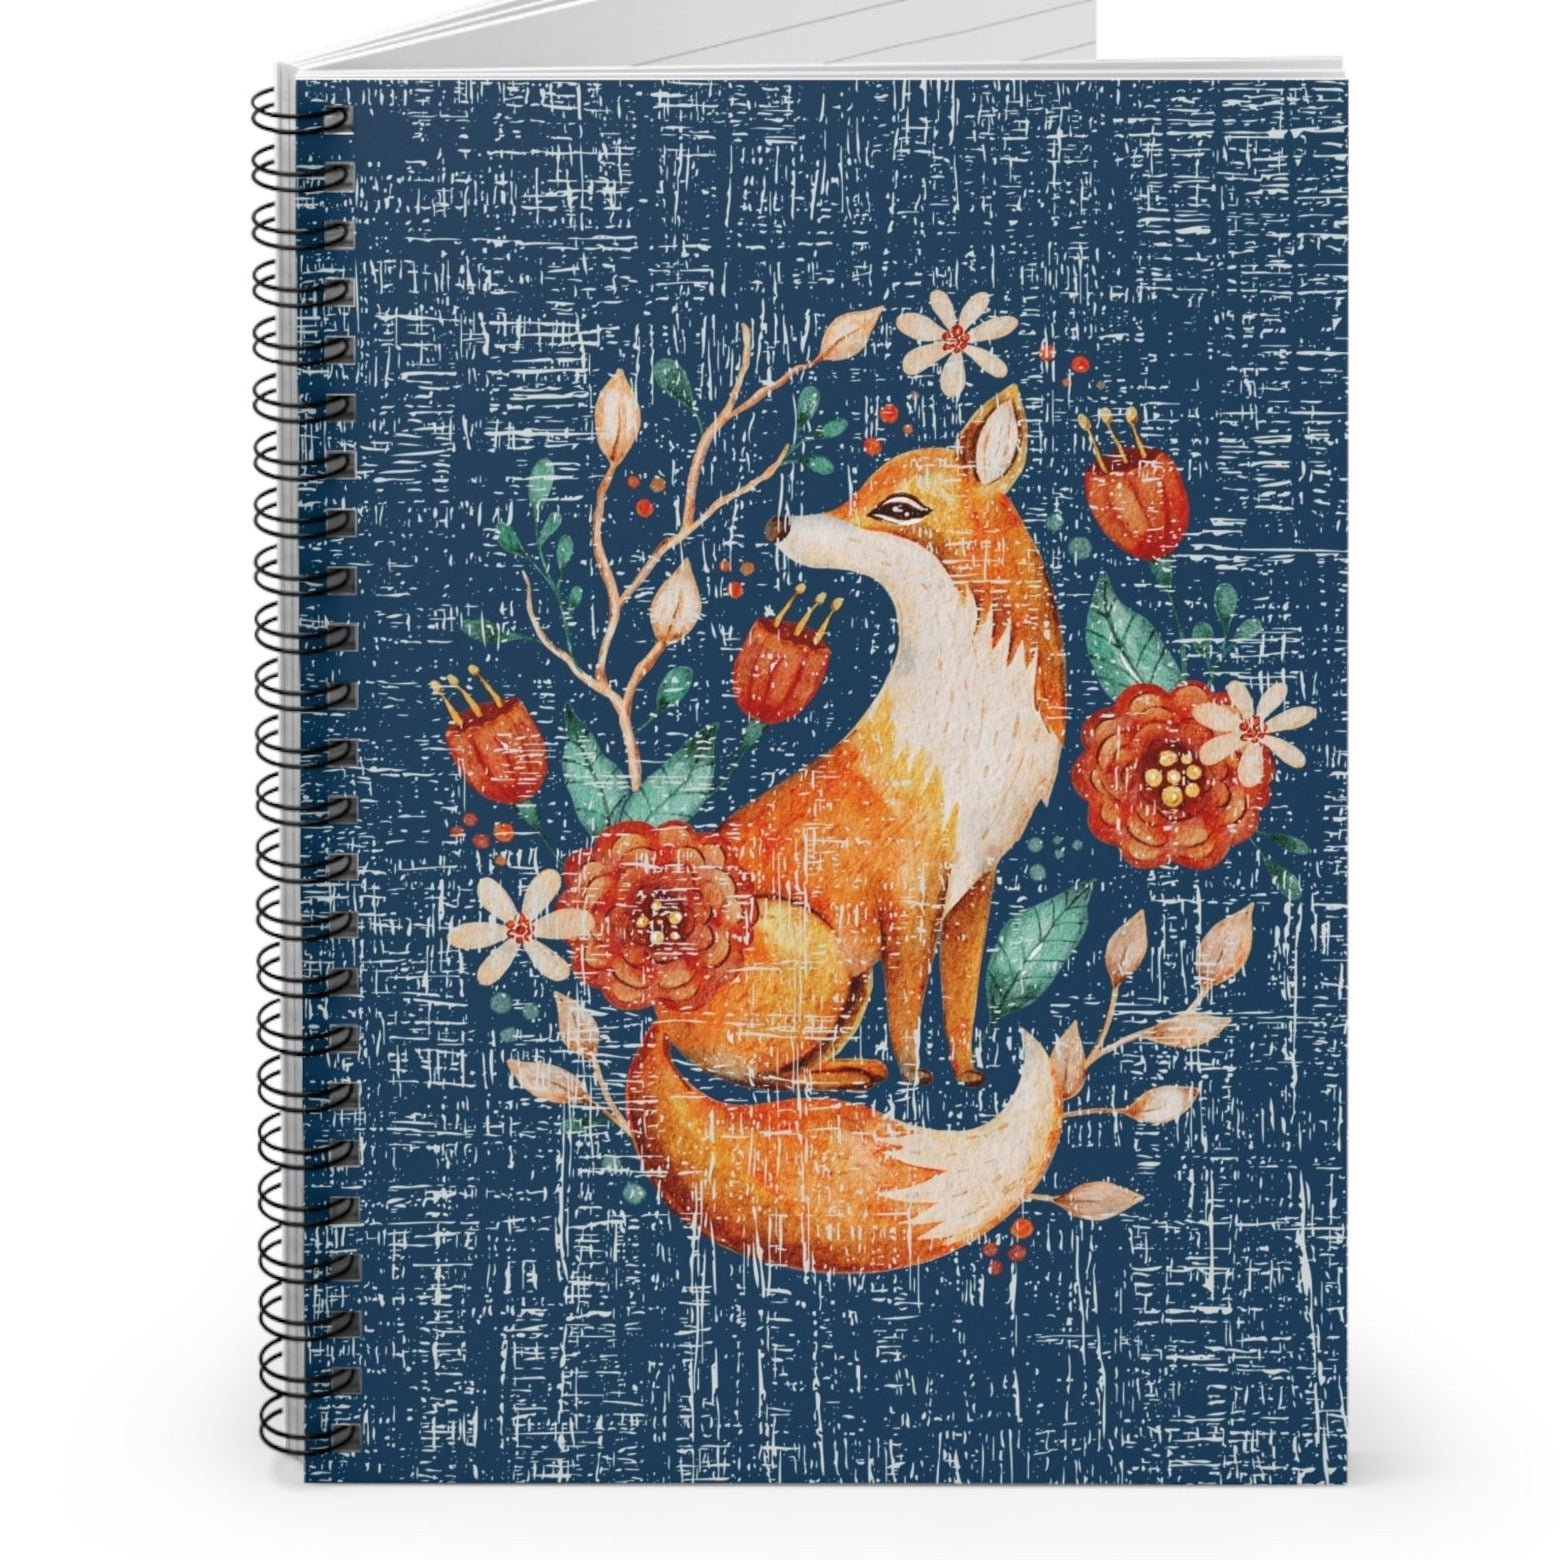 Foxy Fall Floral Spiral Notebook - Ruled Line: Whimsical Autumn Design - Eddy and Rita